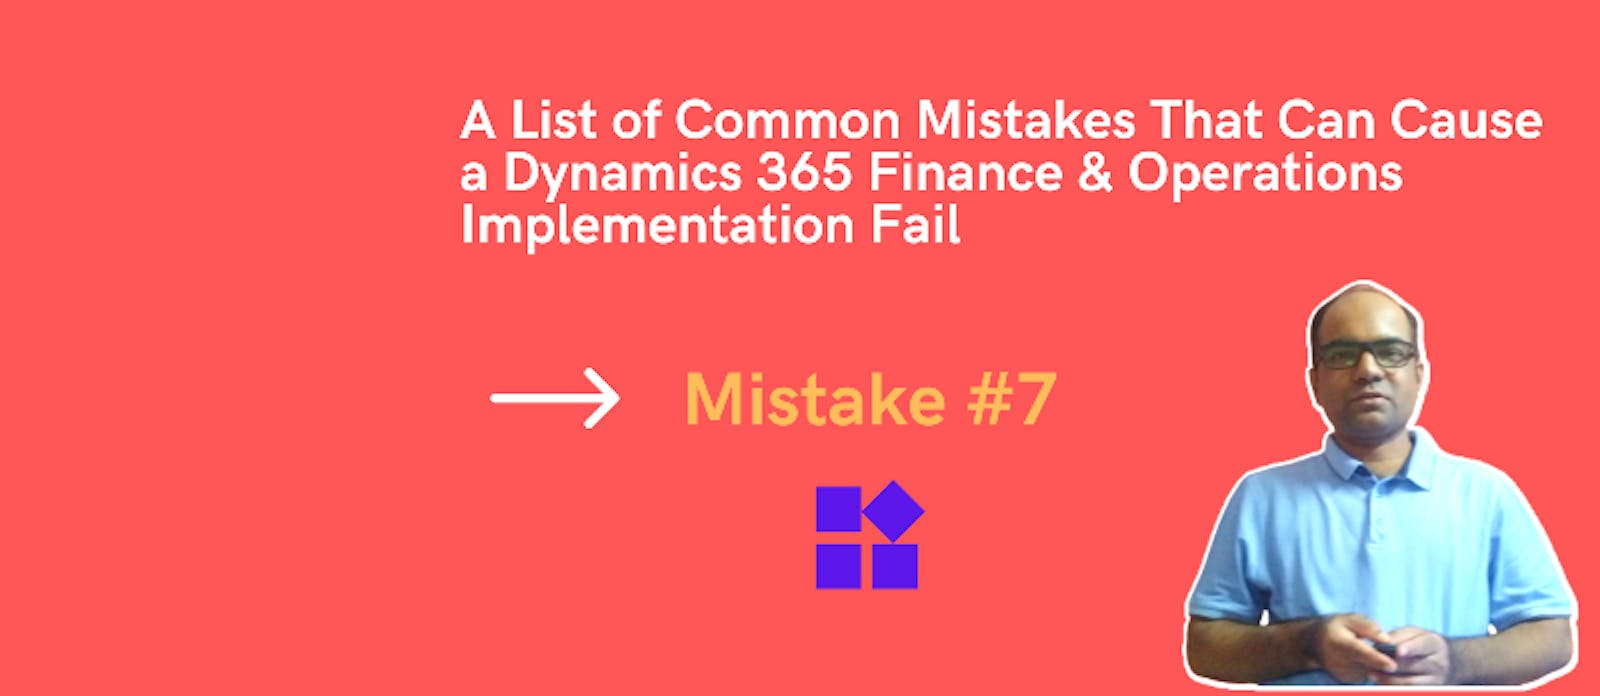 Mistake #7 - Risky to start a Dynamics 365 FO project without acquiring the requisite skills